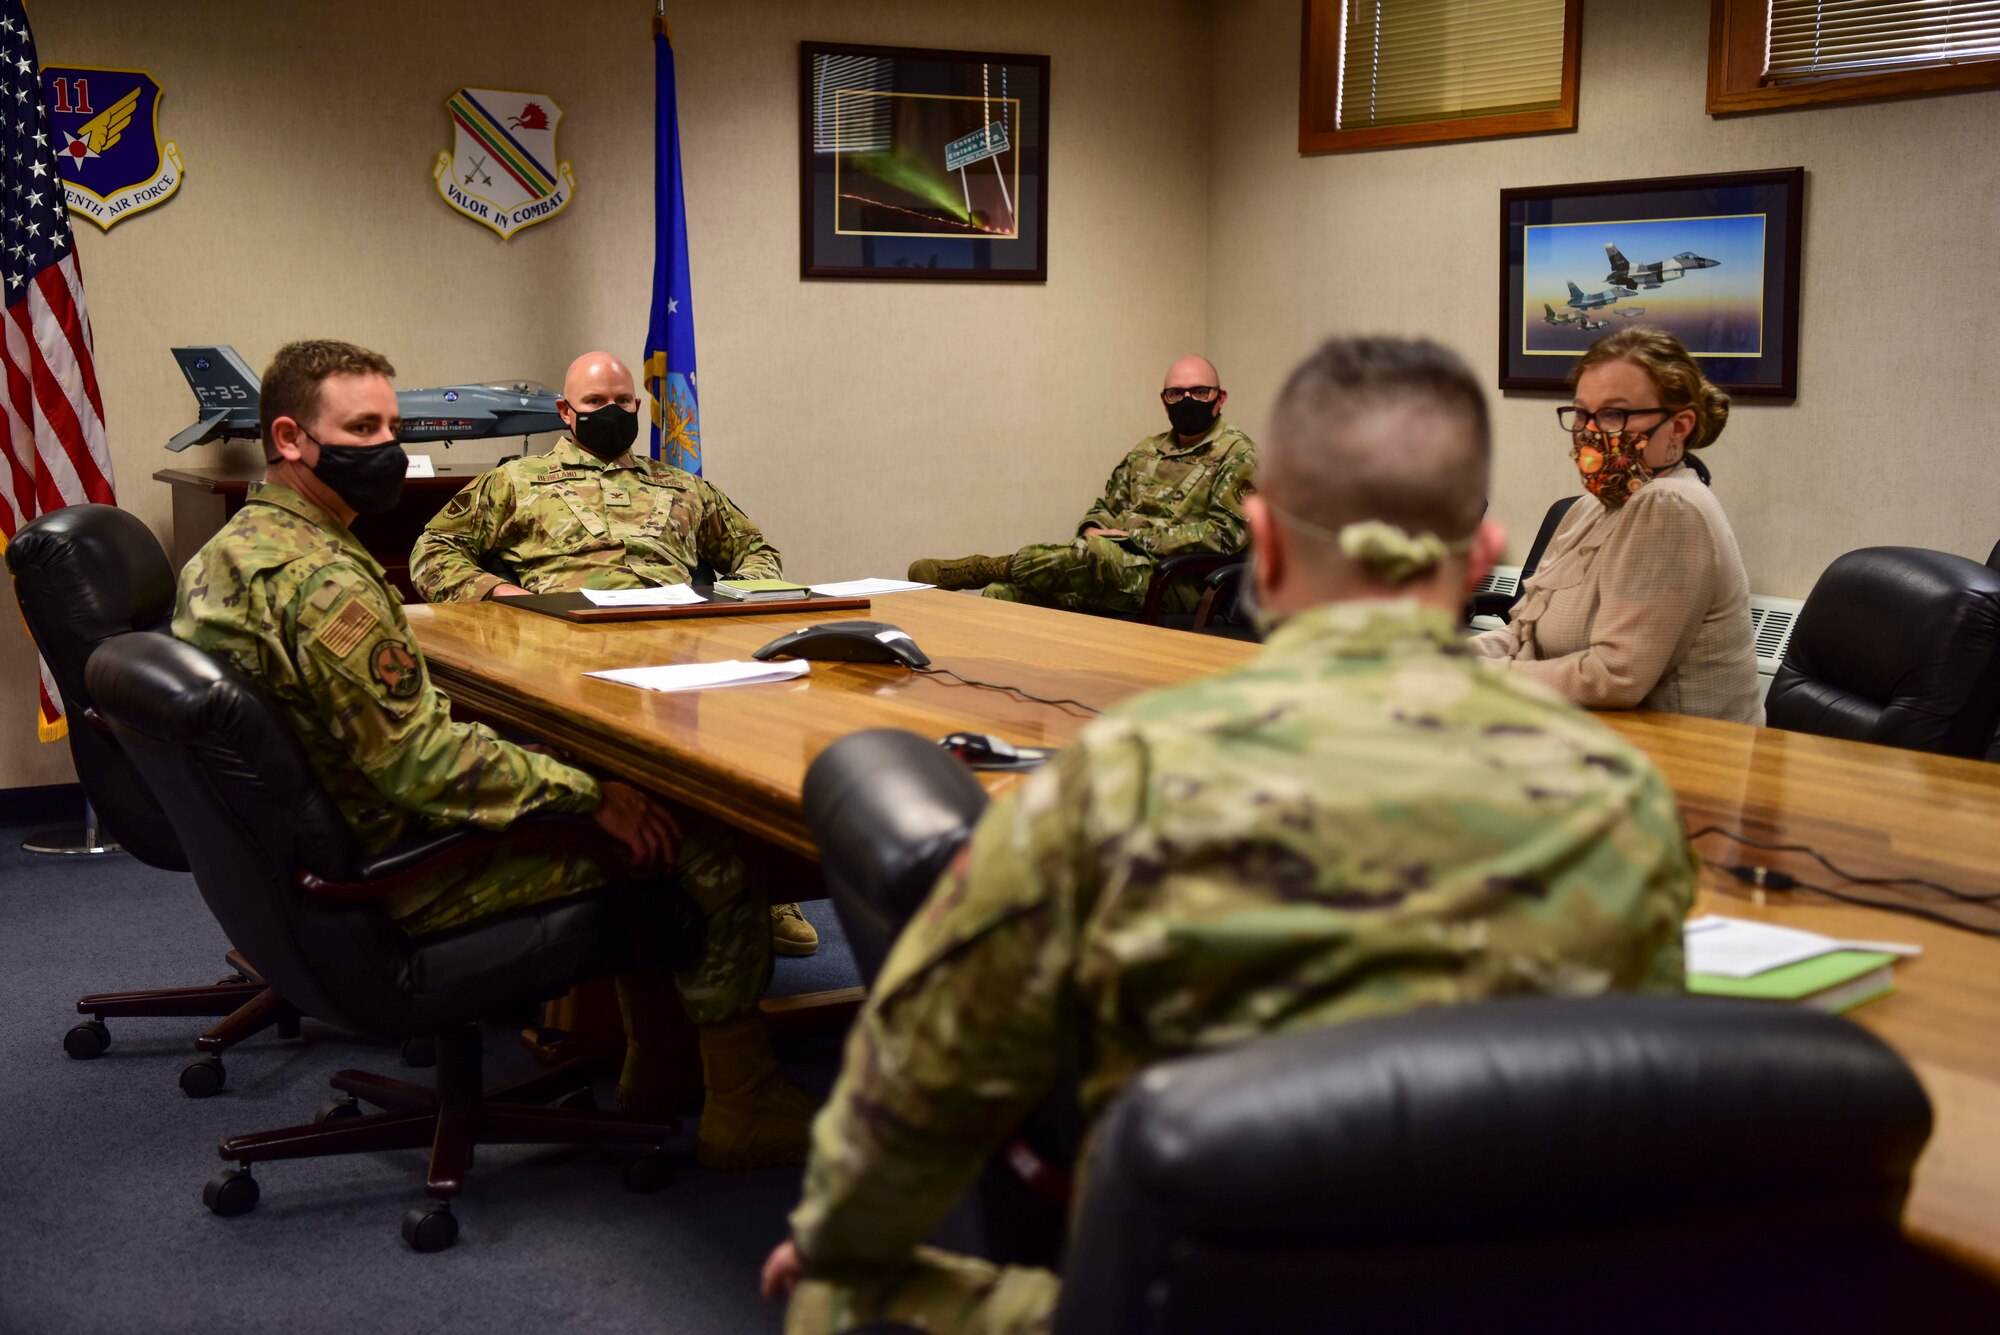 U.S. Air Force Col. David Berkland, the 354th Fighter Wing commander, and Chief Master Sgt. Michael Zeigler, the 354th Logistics Readiness Squadron vehicle management flight chief, meet with the 354th Comptroller Squadron (CPTS) leaders during a wing leadership immersion at Eielson Air Force Base, Alaska, Sept. 22, 2020.